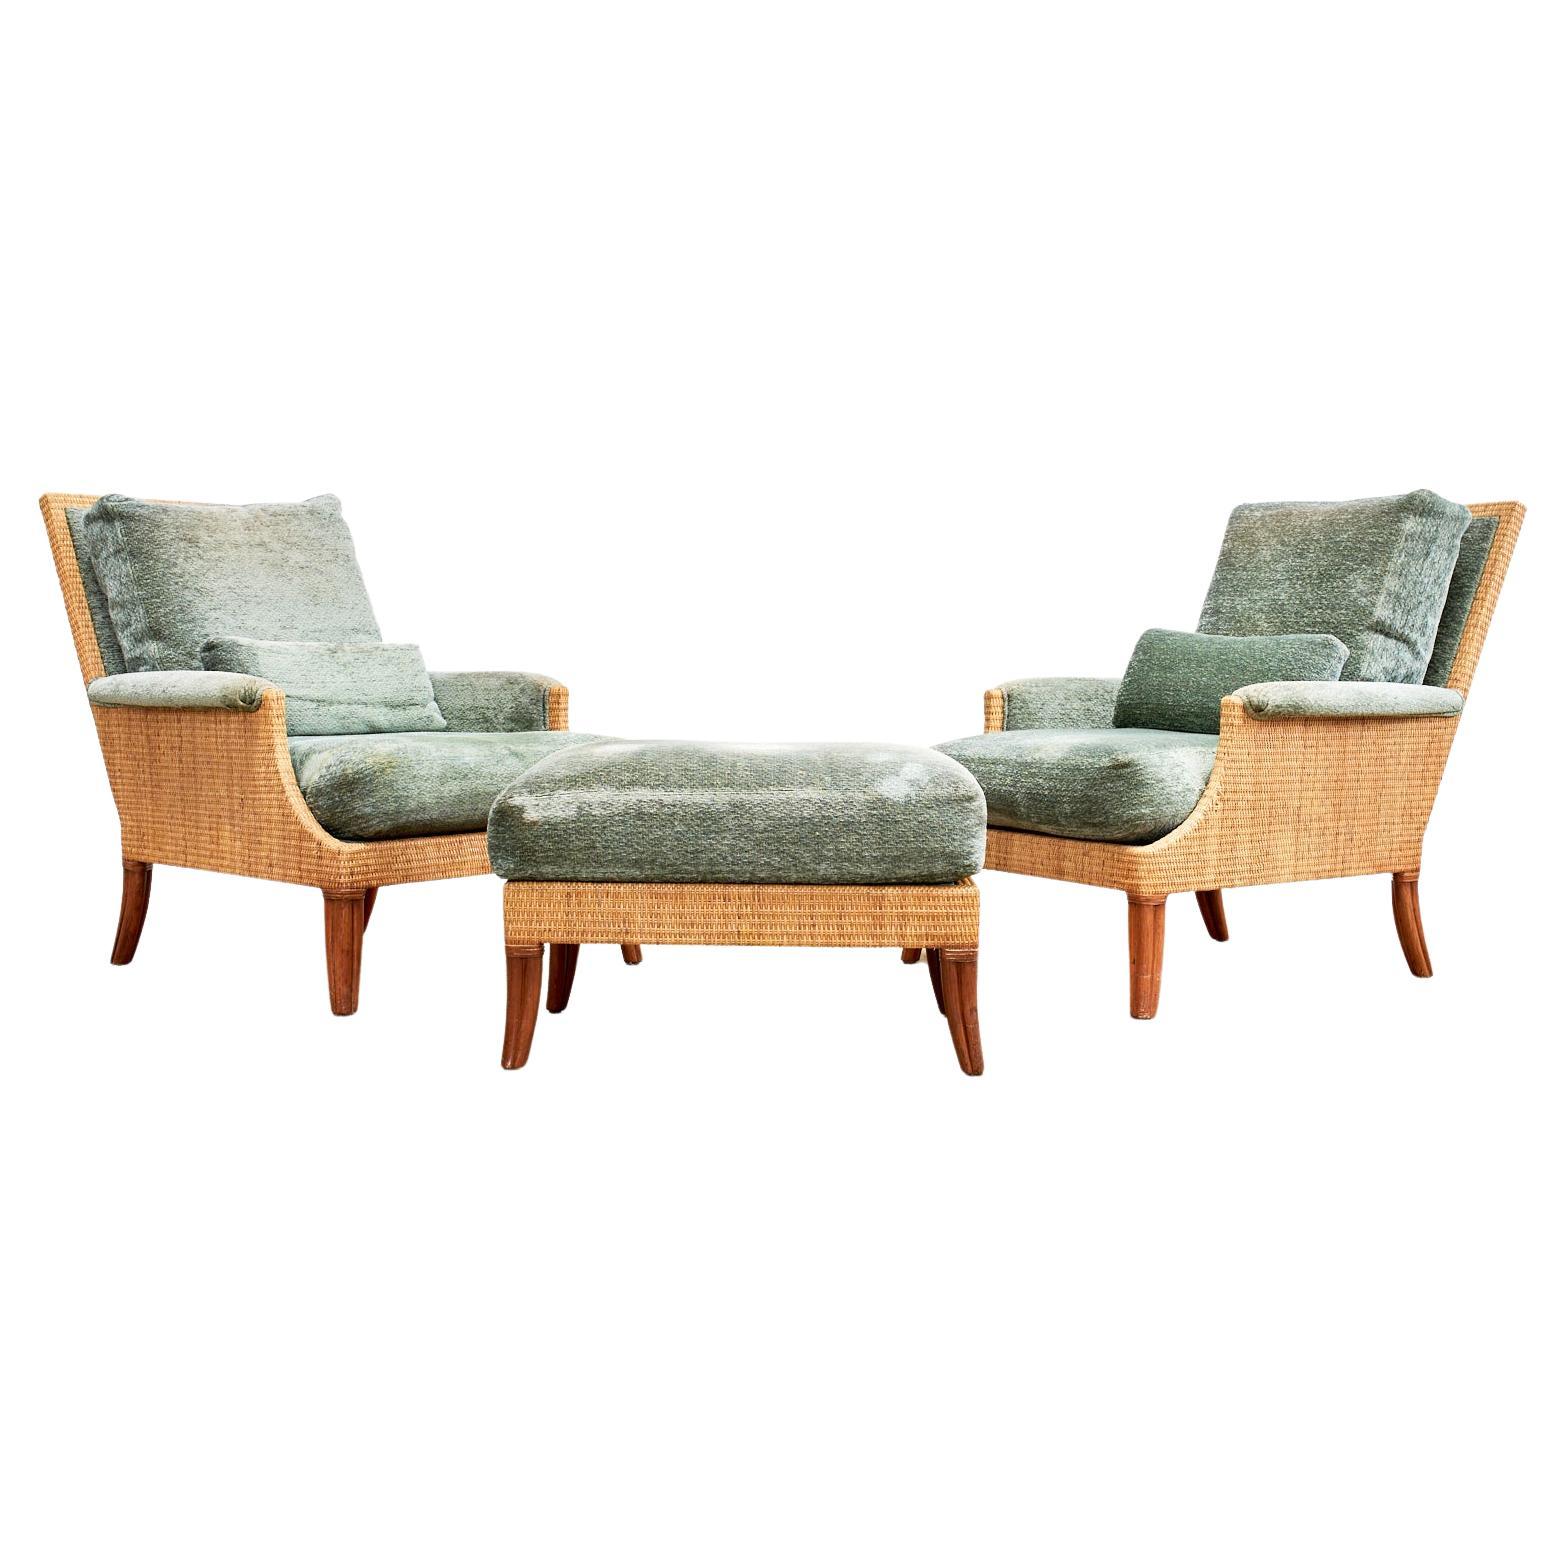 Pair of McGuire Rattan Wicker Umbria Lounge Chairs with Ottoman